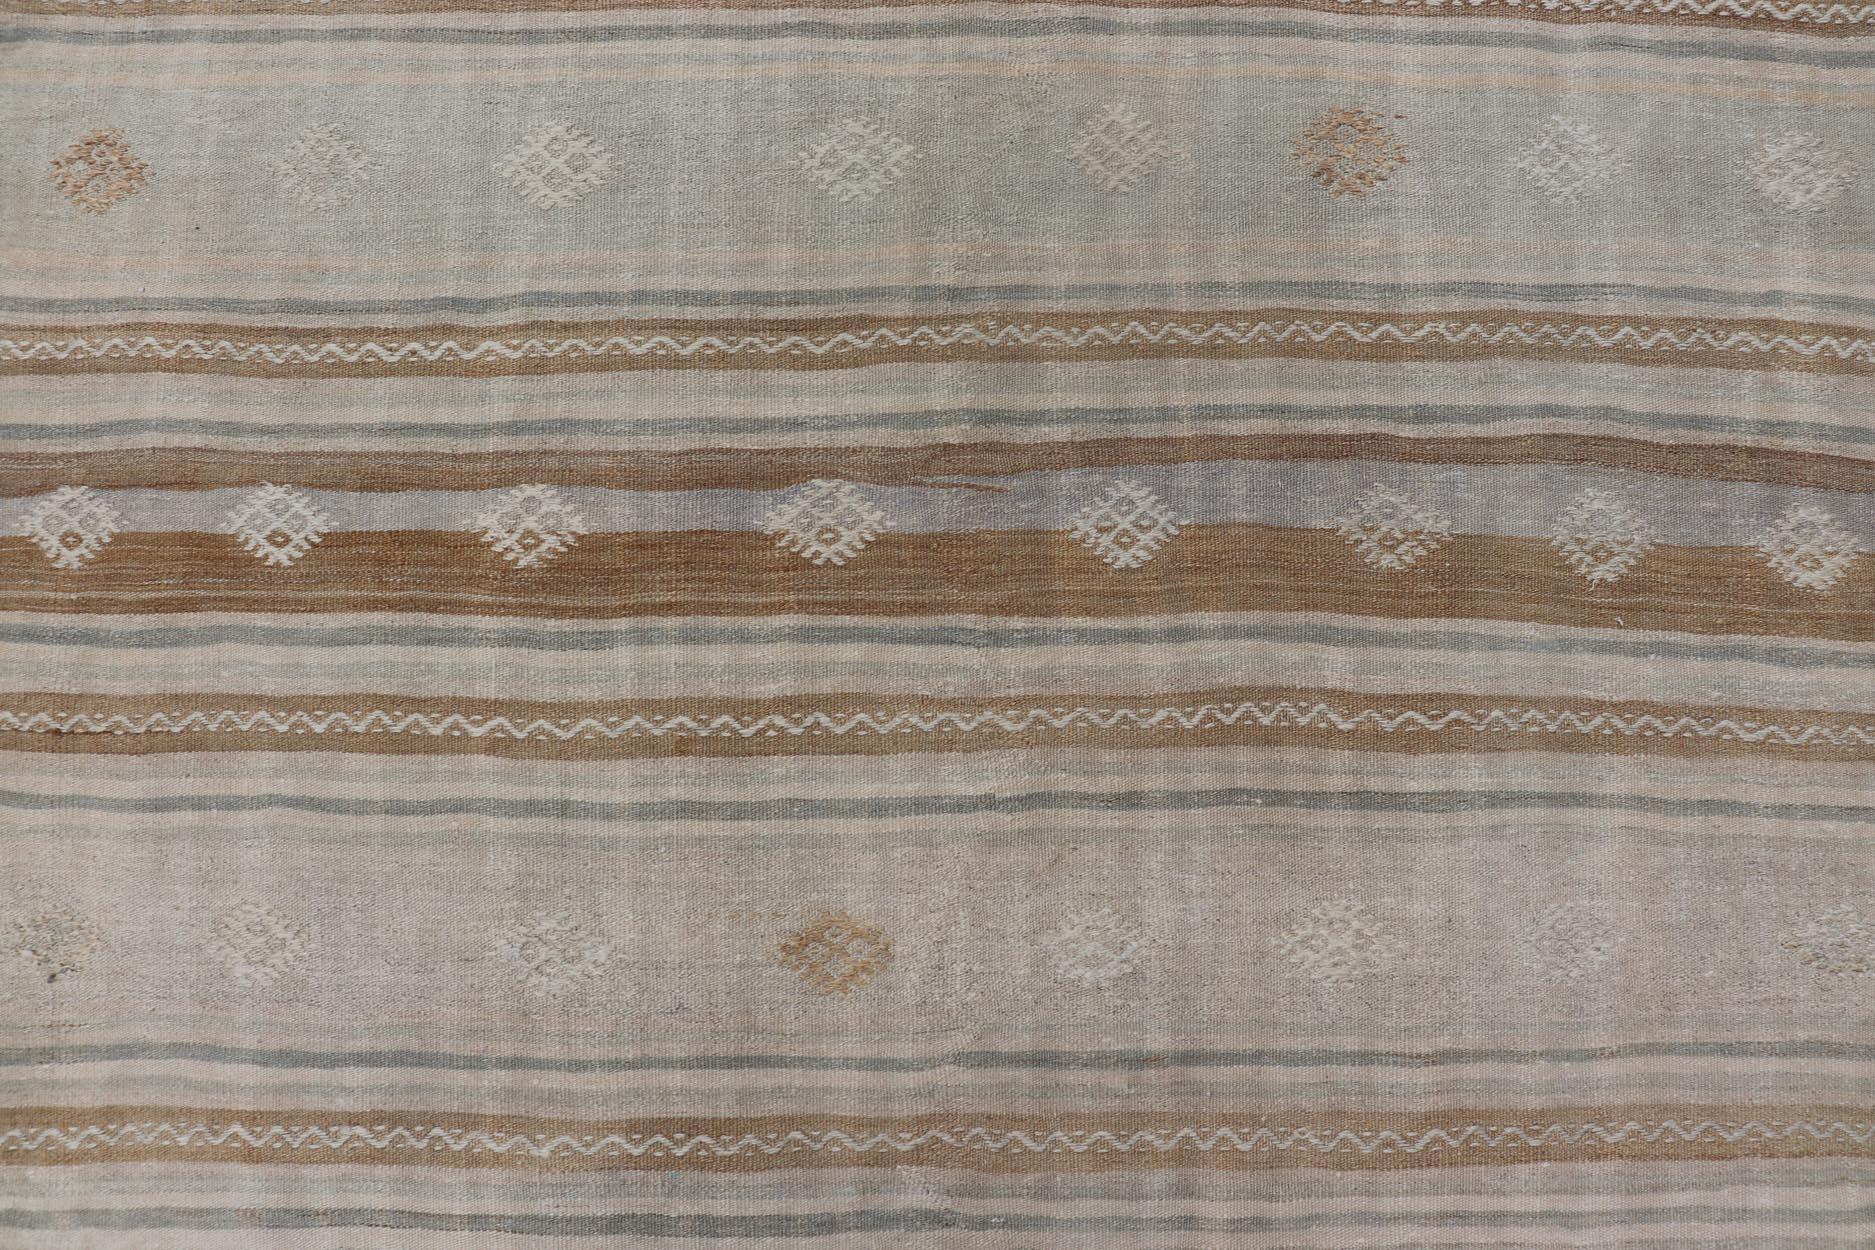 Turkish Flat-Weave Embroideries Kilim in Tan, Taupe, Brown and a Soft Blue For Sale 2